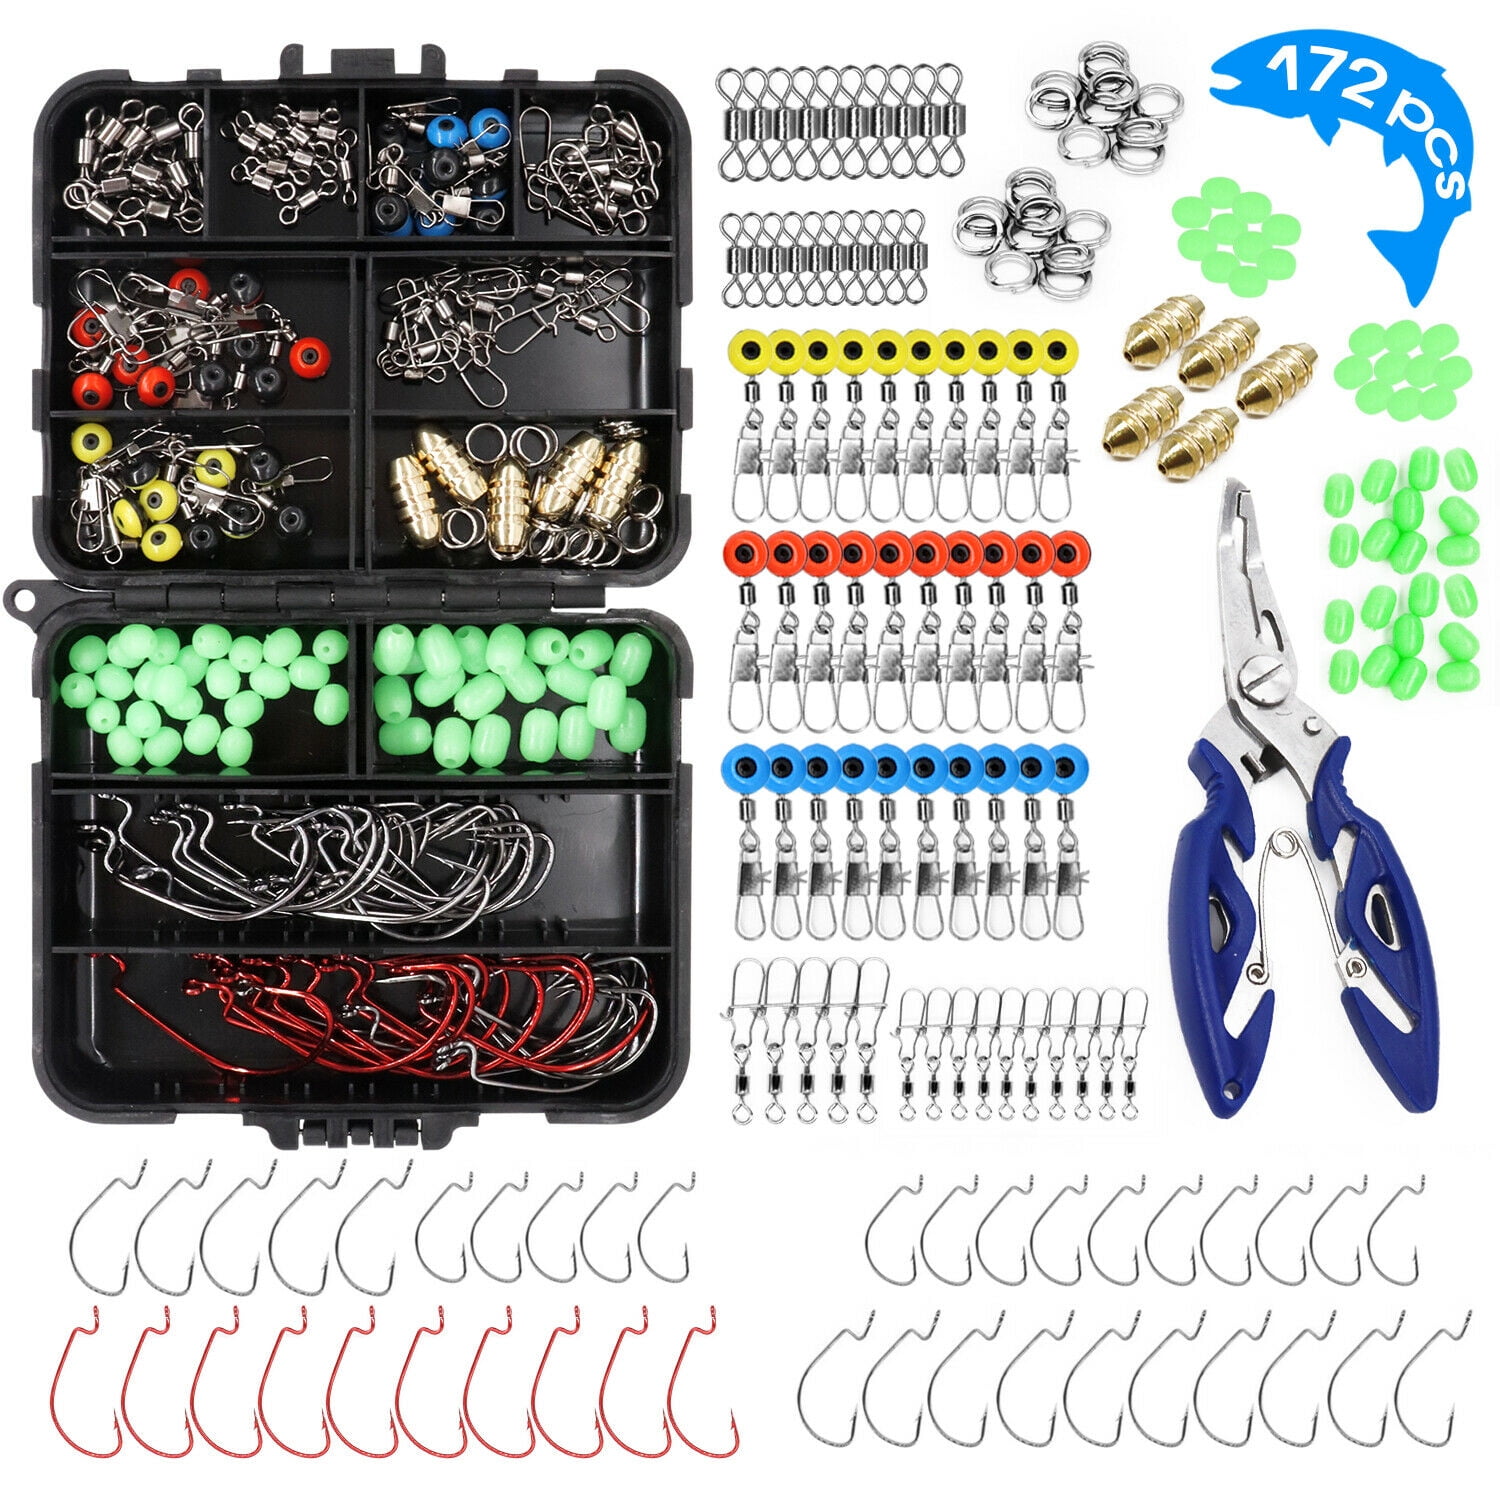 Fishing Accessories Kit With Fishing Swivels Hooks Sinker Weights Tackle Box US 